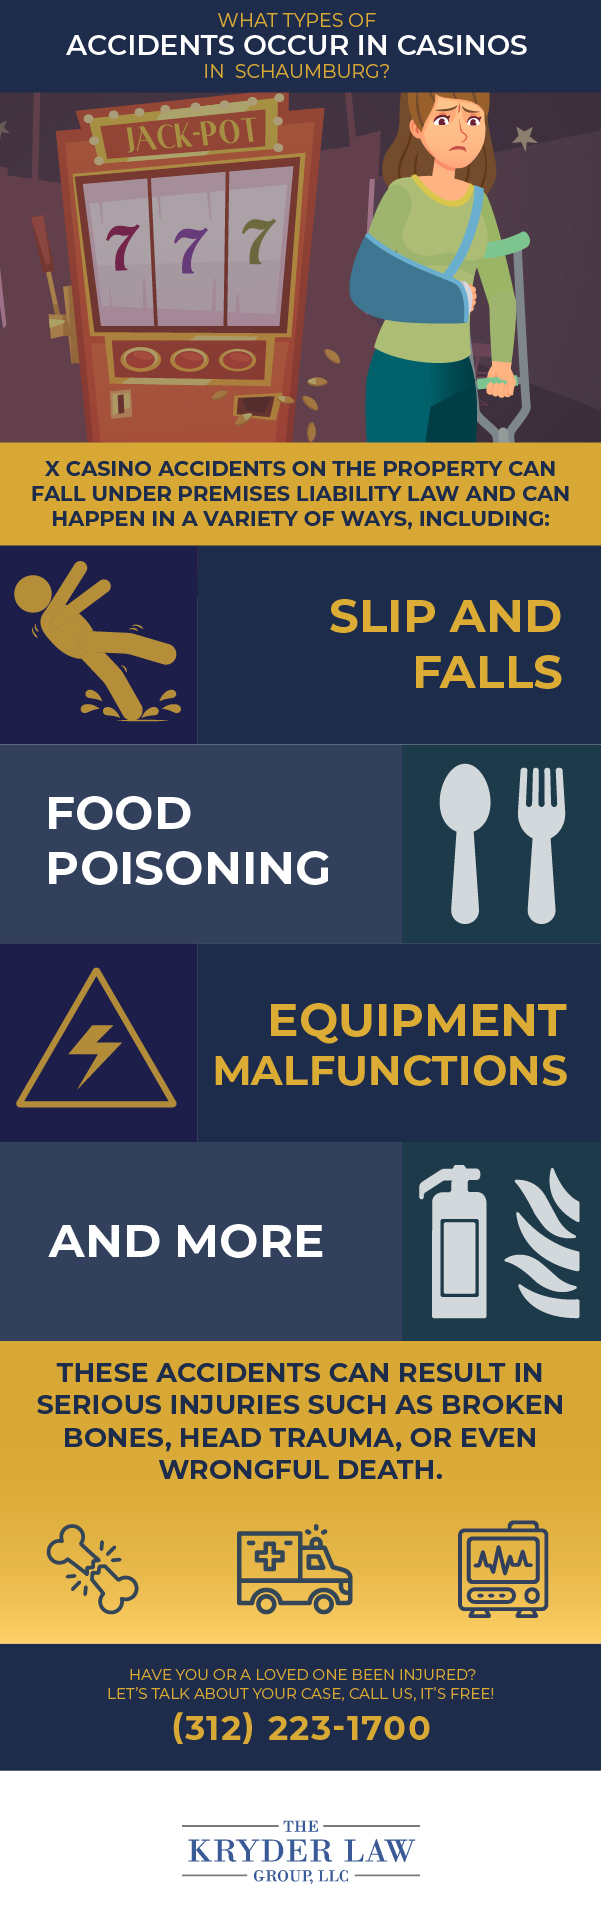 What Types of Accidents Occur in Schaumburg Casinos Infographic